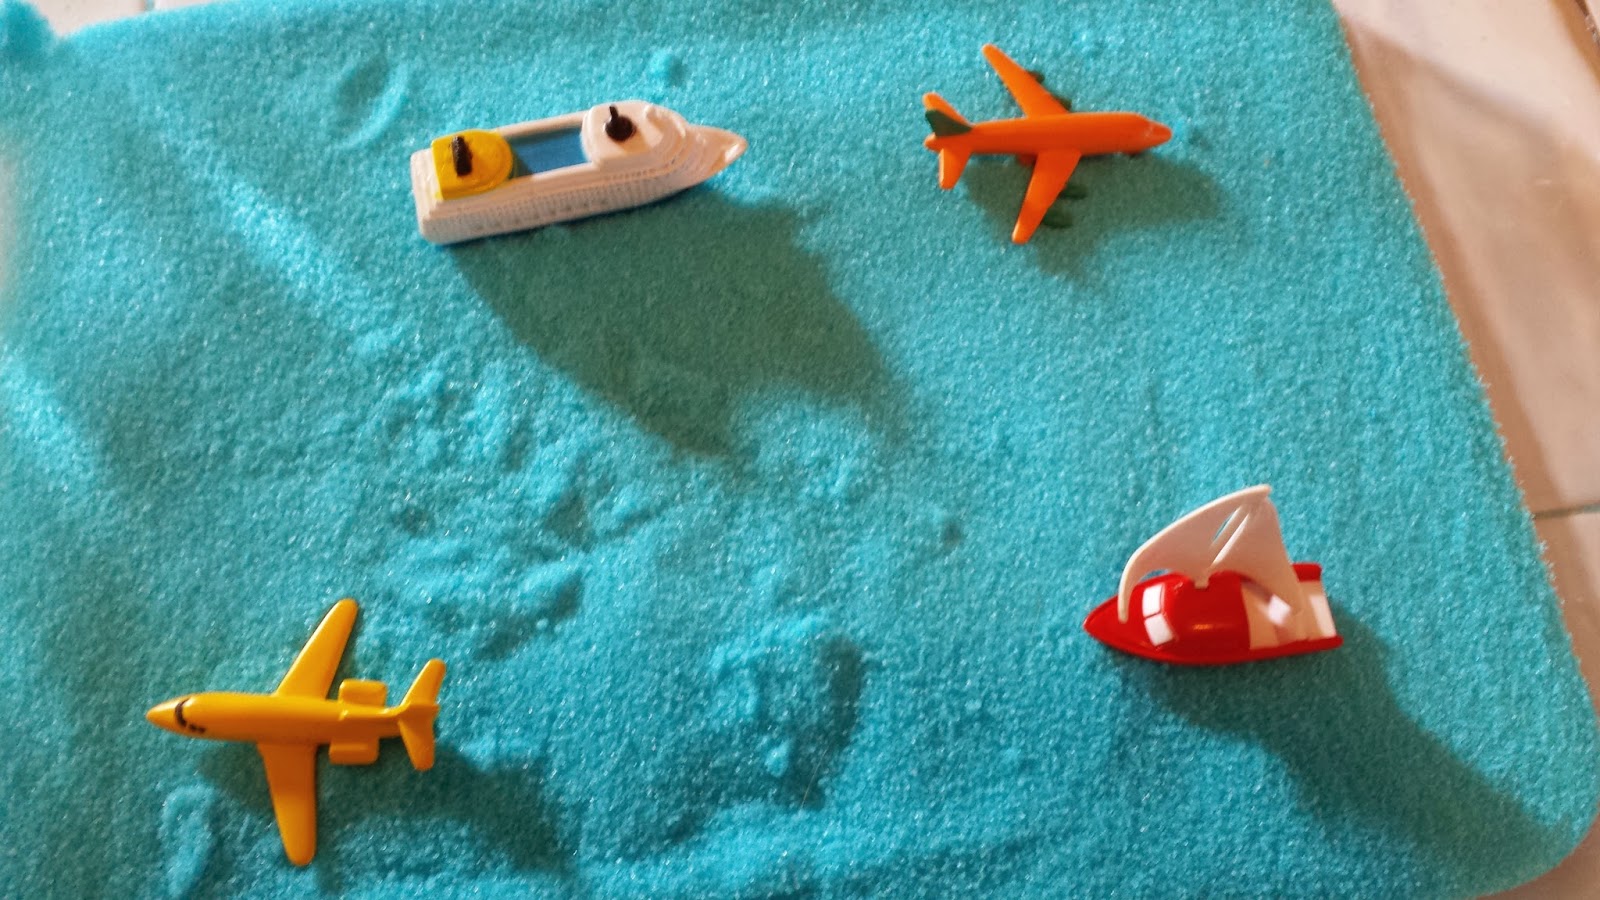 Explore the Skies with an Exciting Airplane Sensory Bin